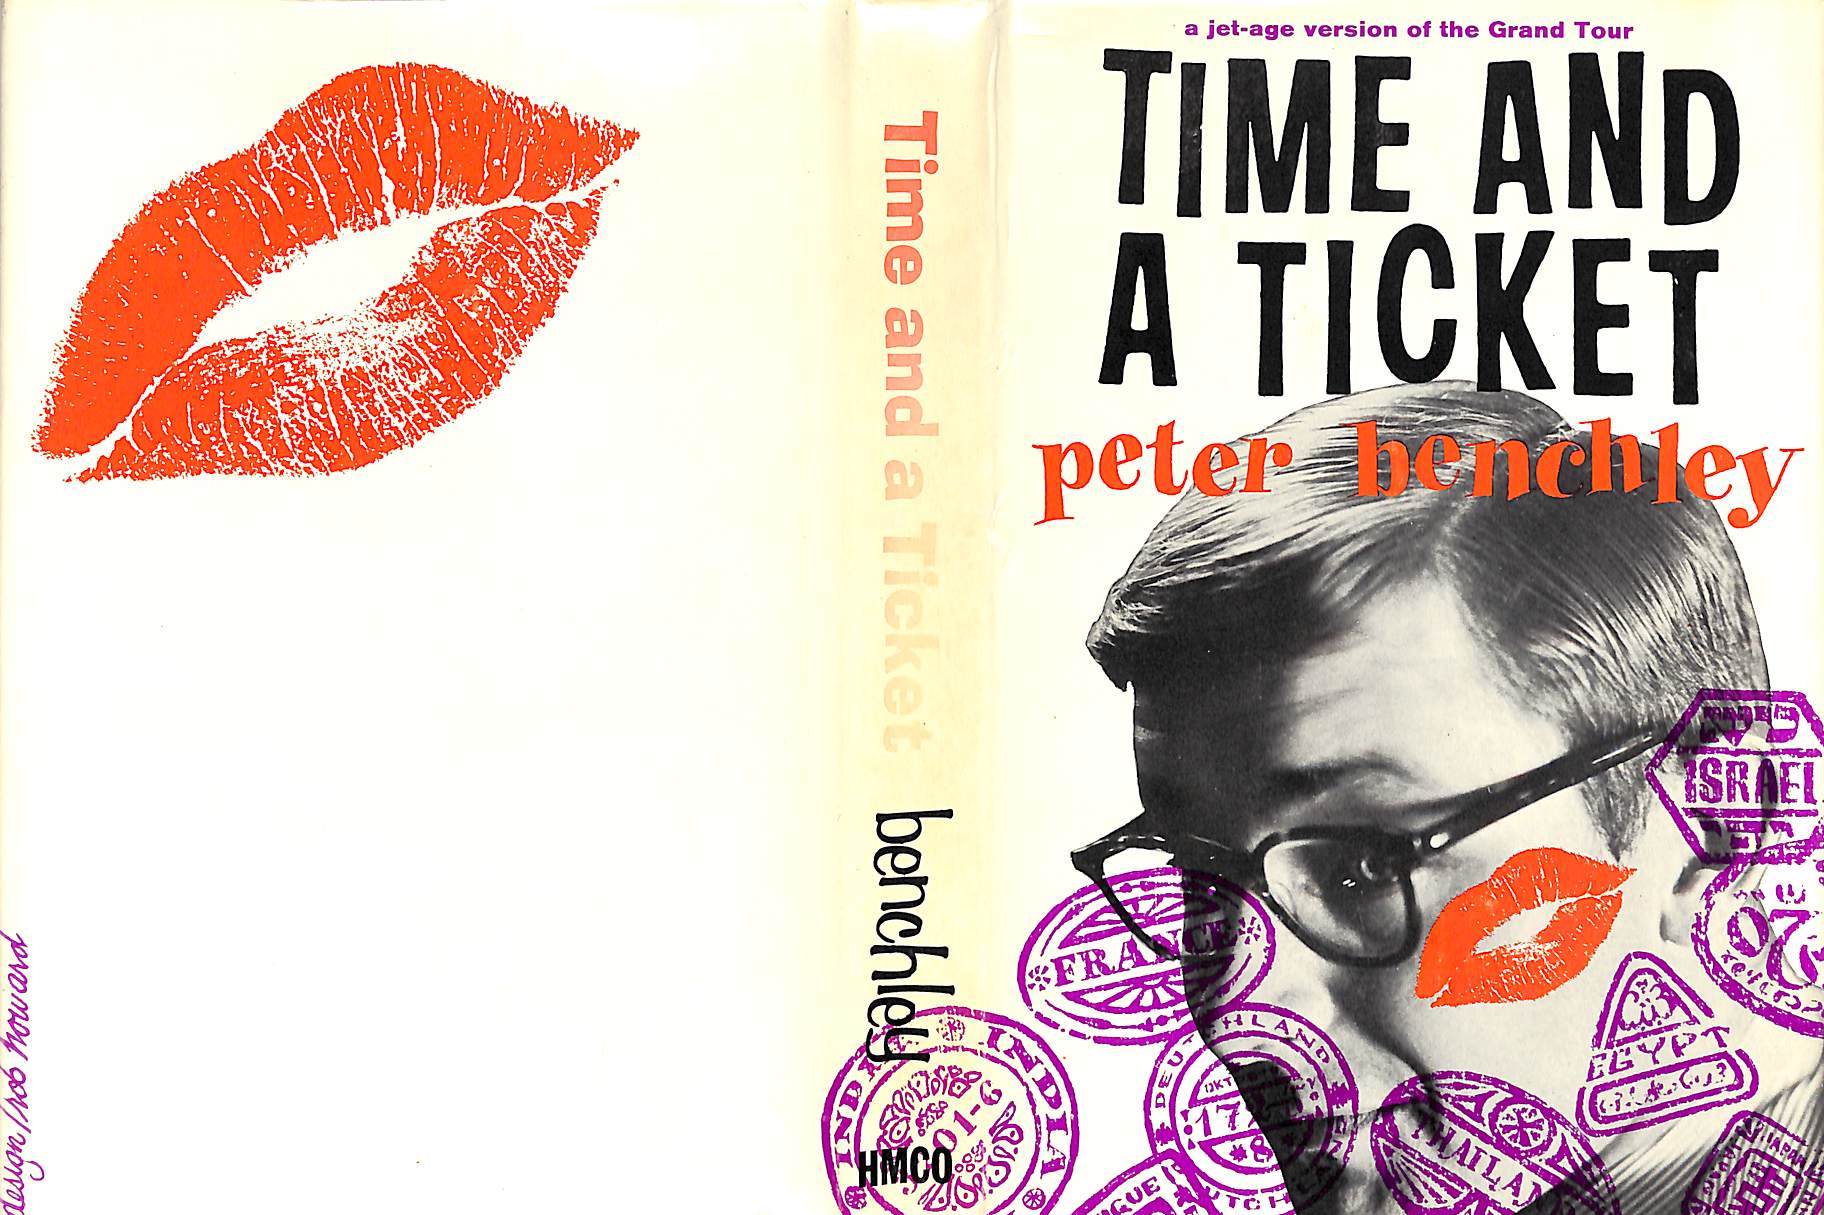 Time And A Ticket A Jet-Age Version Of The